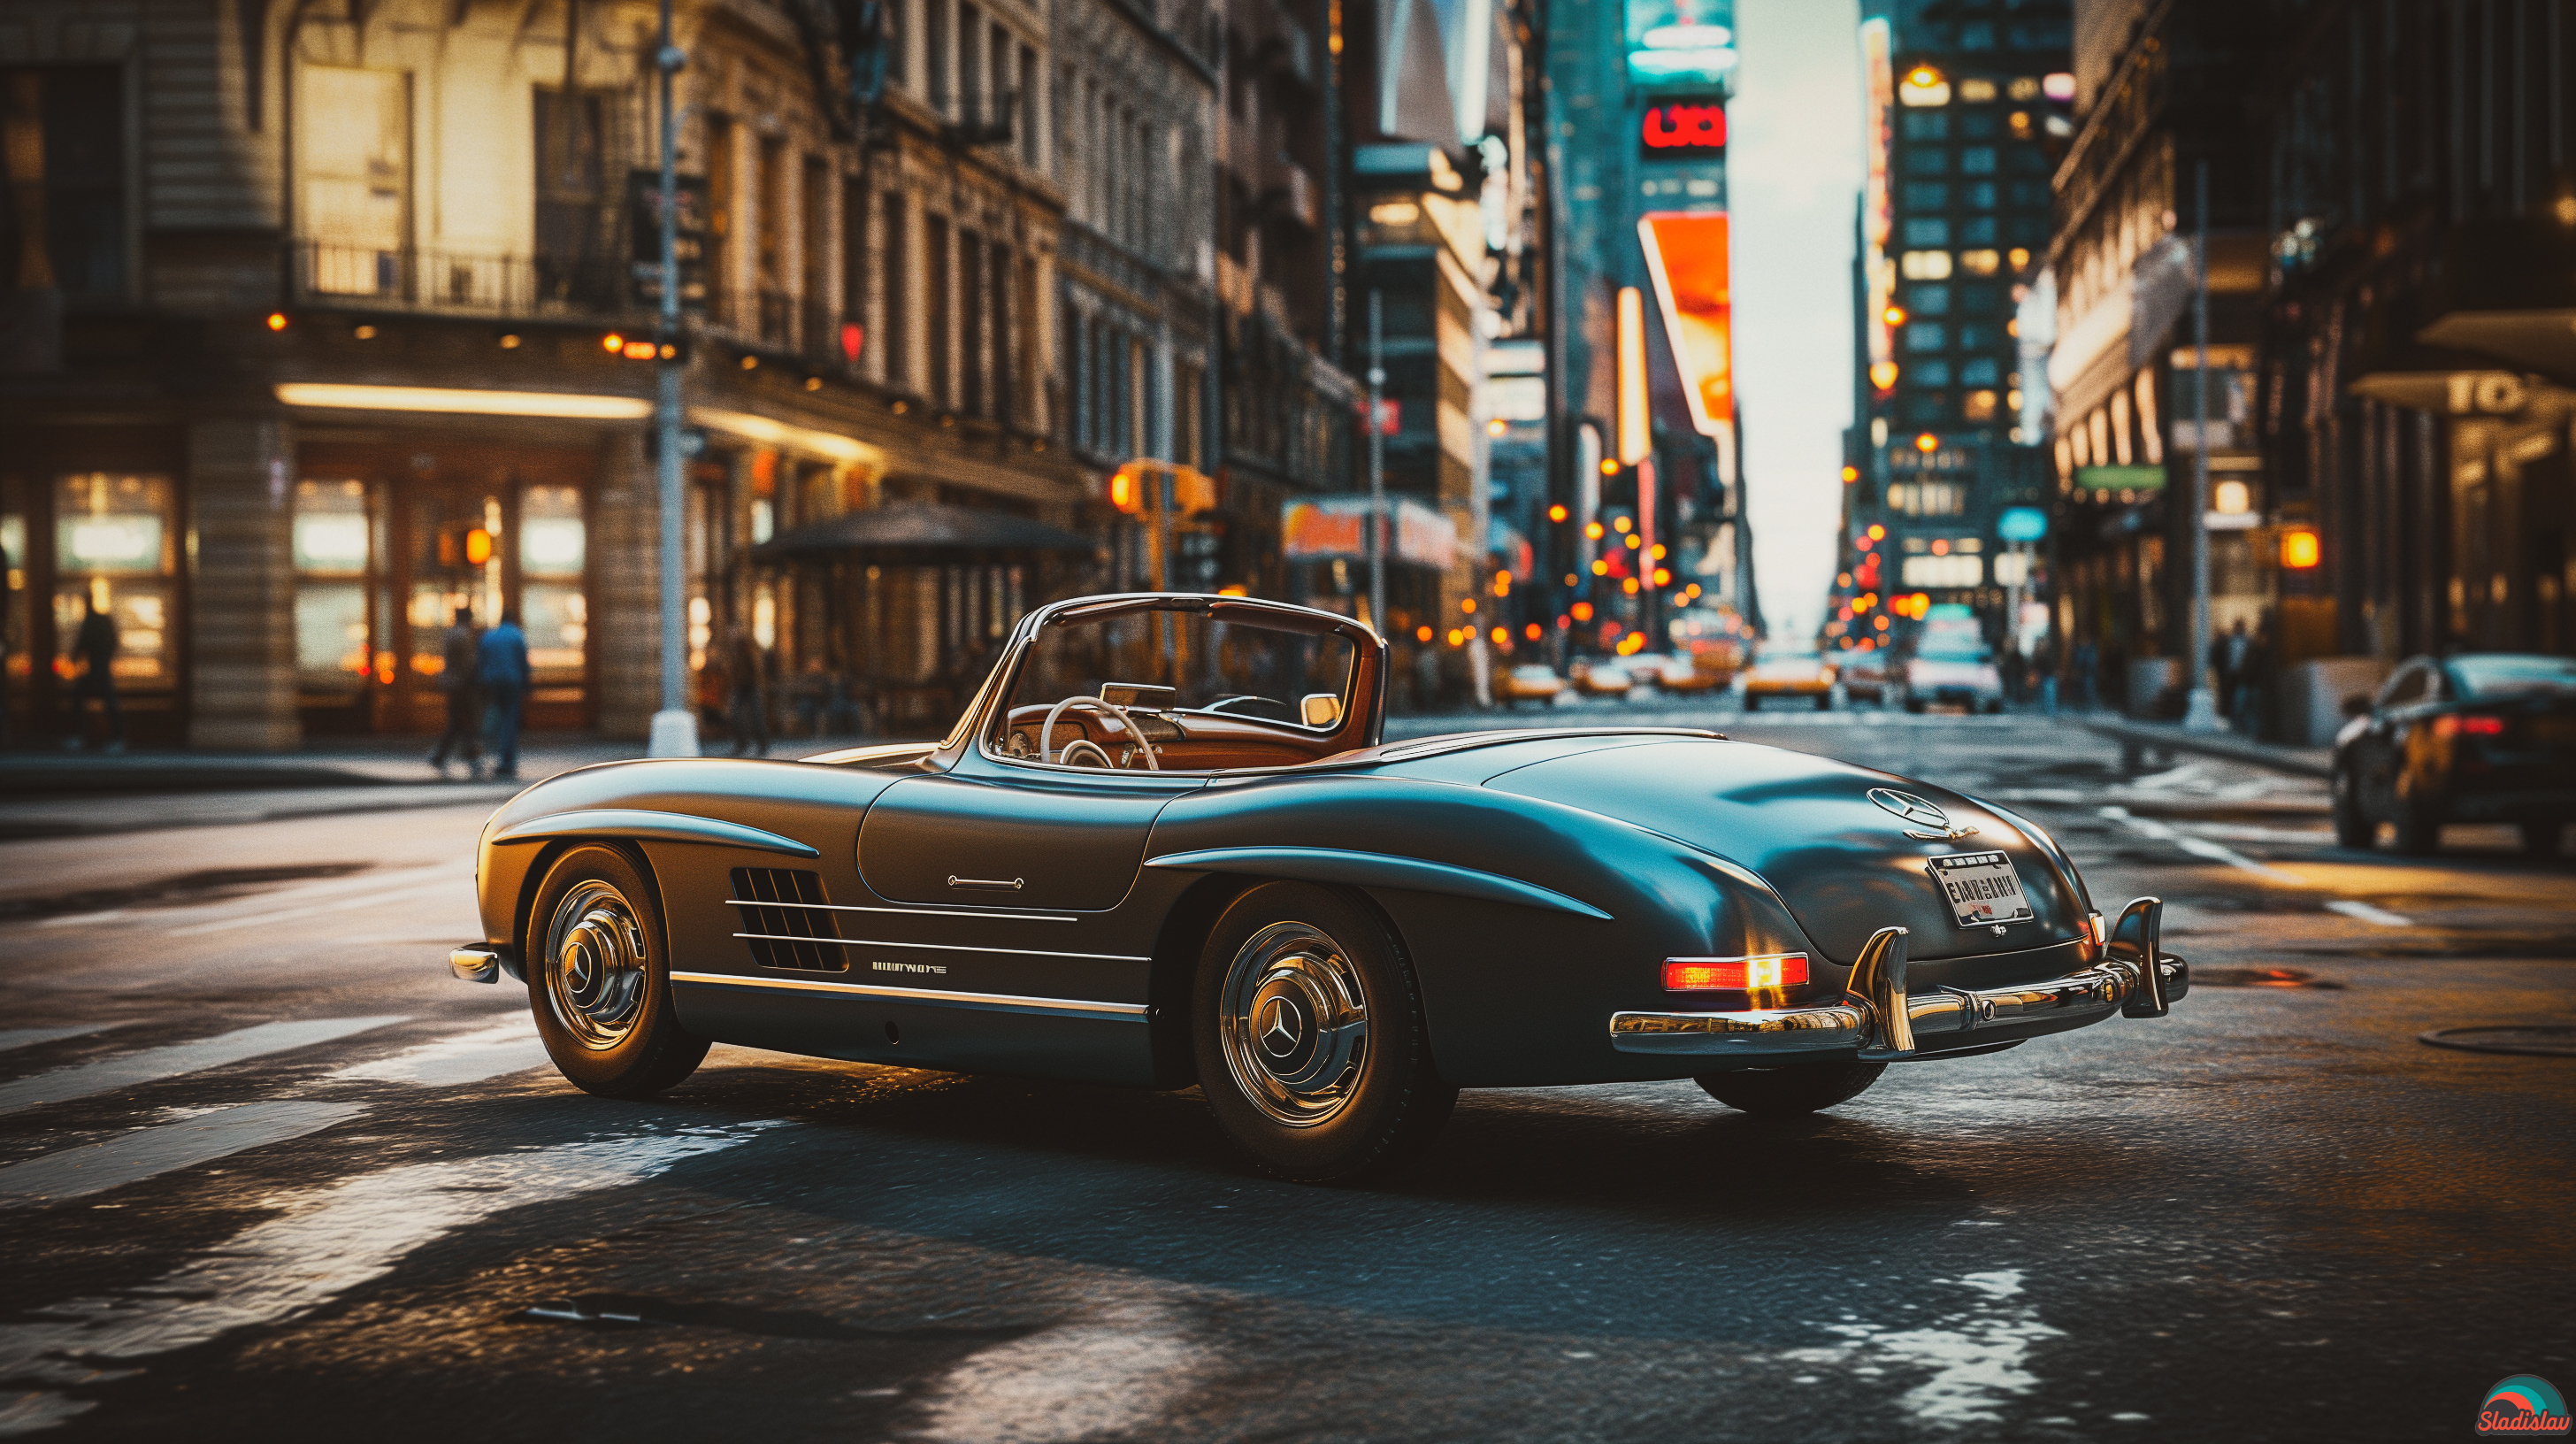 General 2912x1632 AI art Mercedes-Benz 300SL vehicle blue cars rear view taillights depth of field crosswalk building watermarked city lights licence plates car signs street people